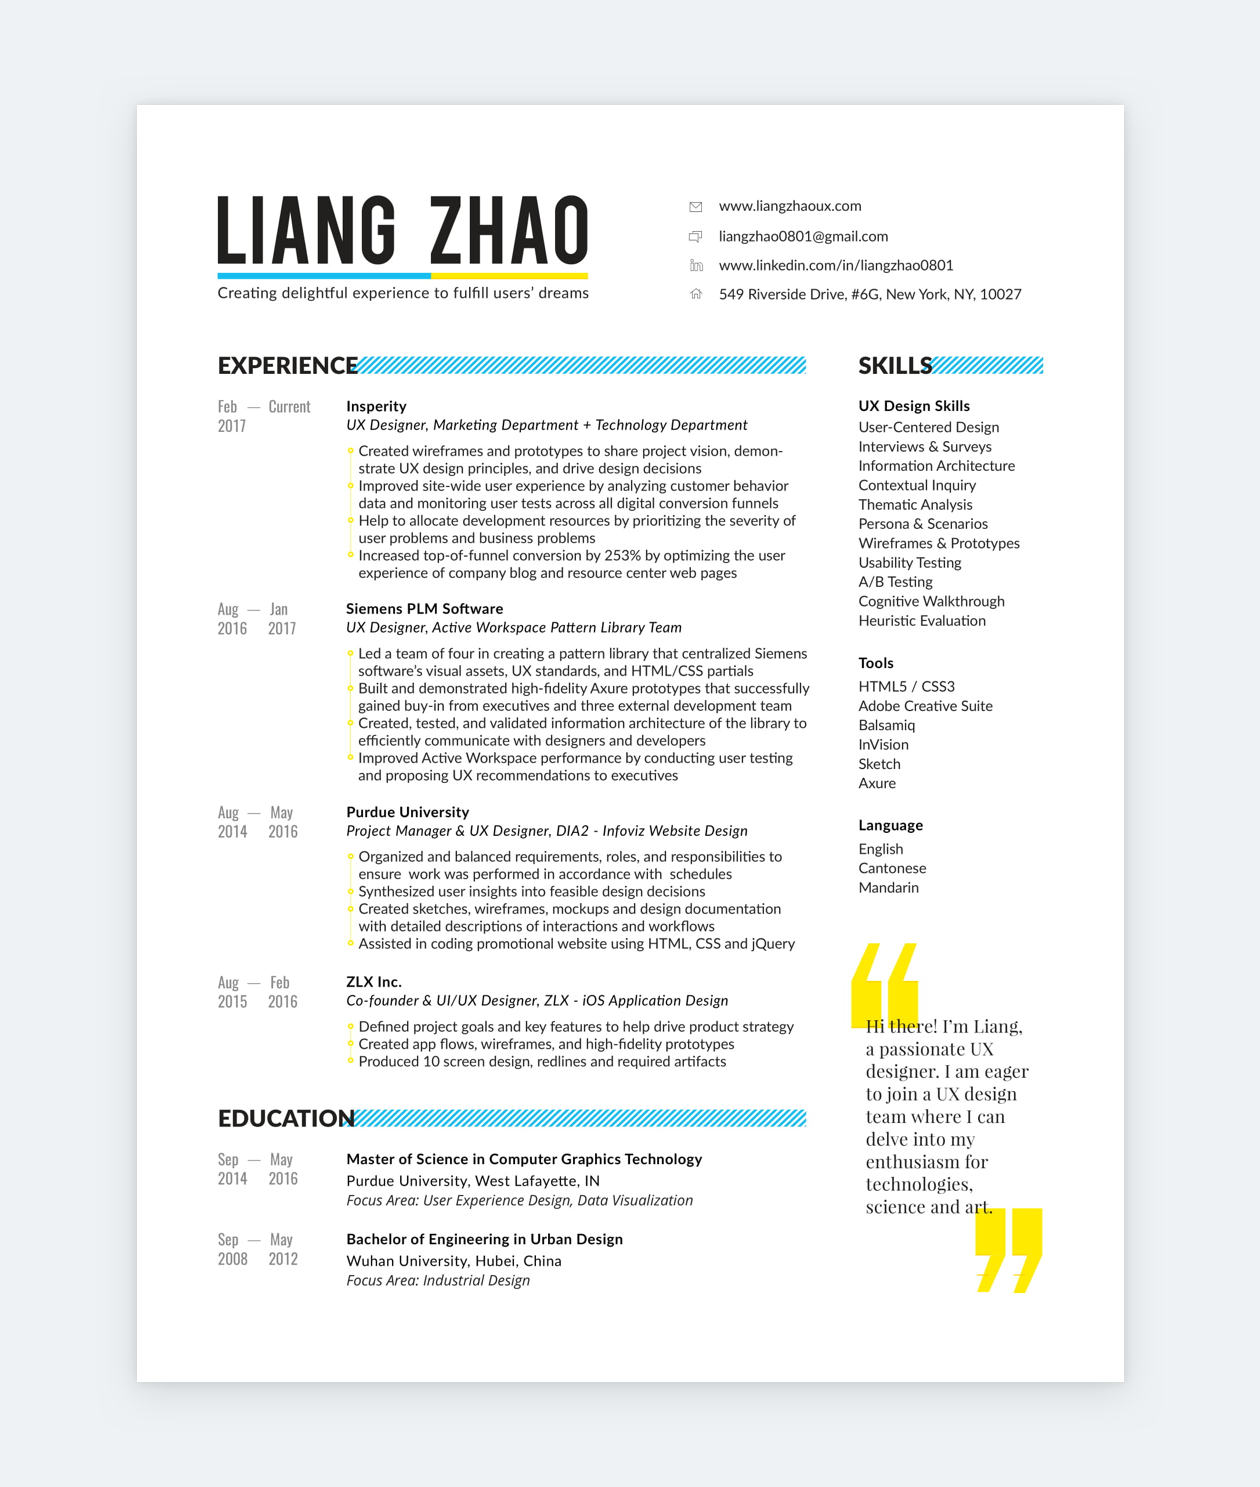 Liang Zhao's product designer resumé